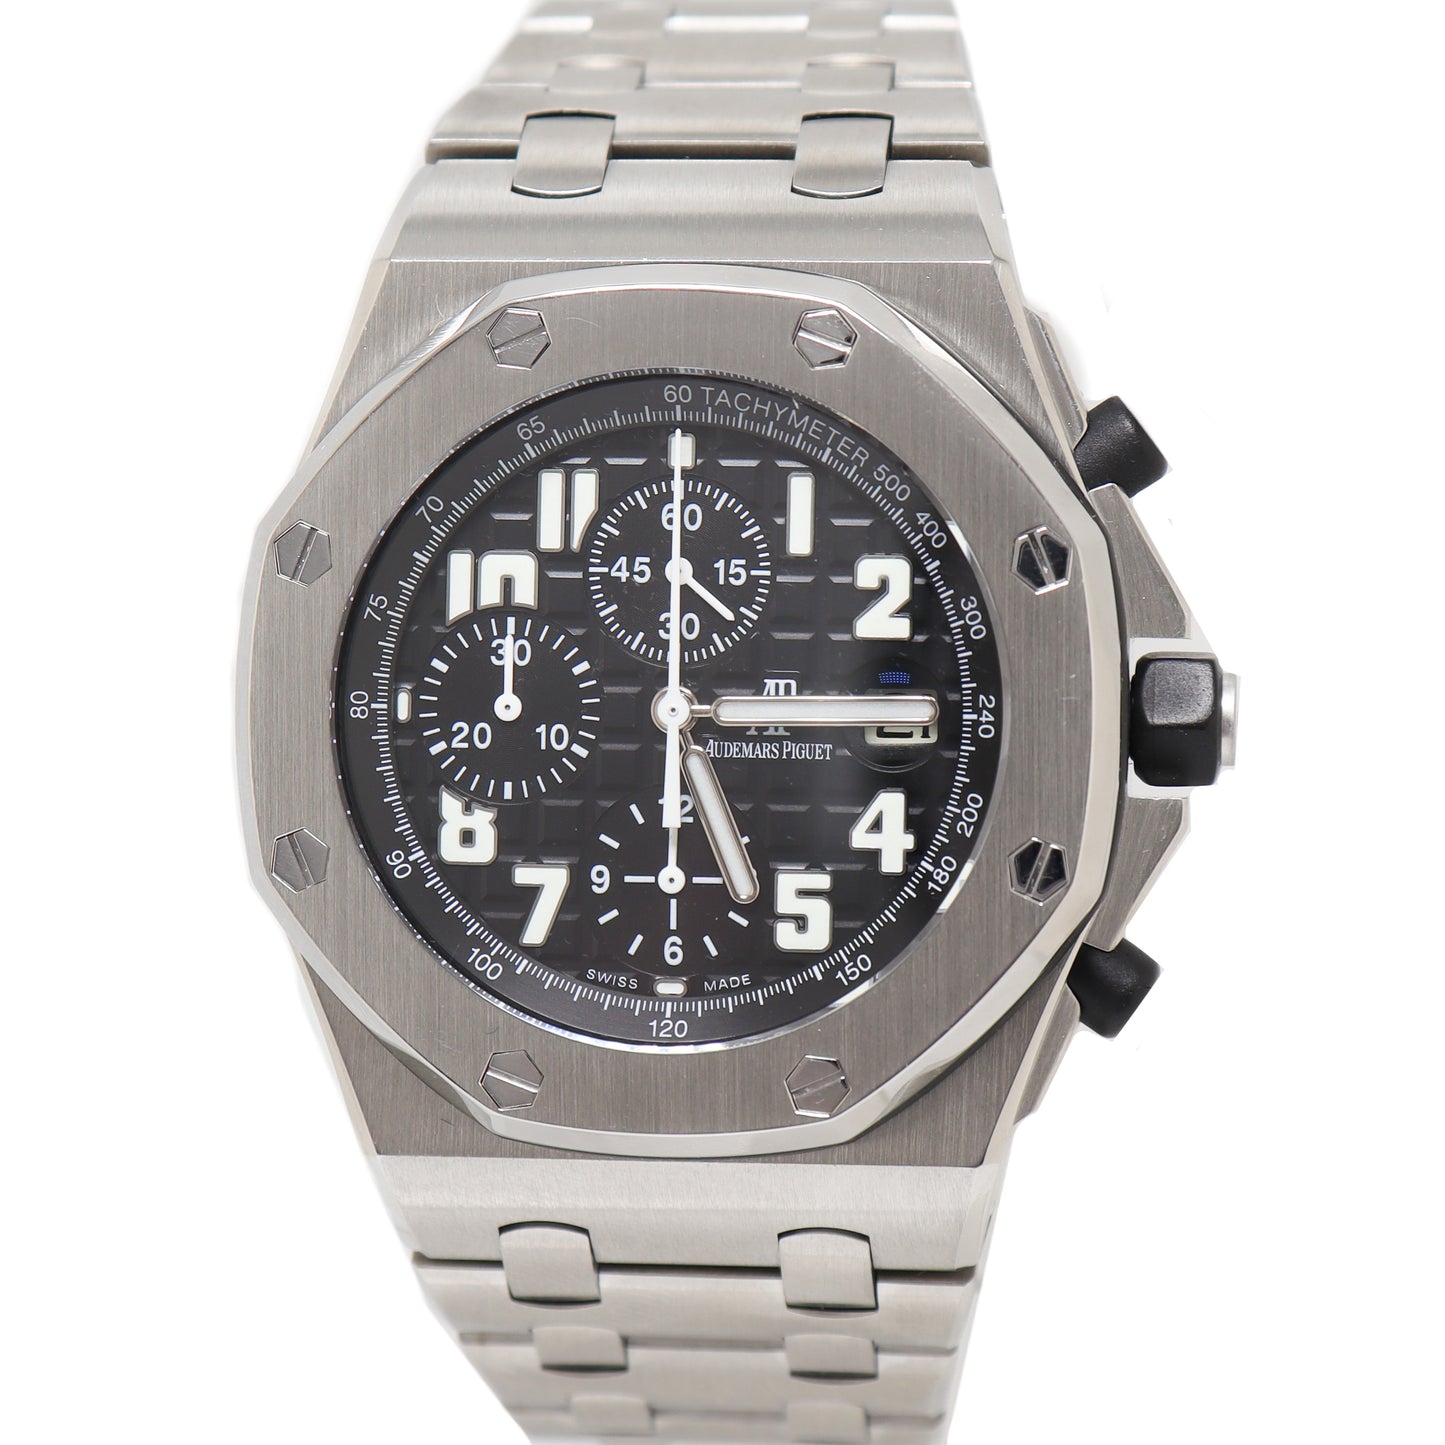 Audemars Piguet Mens Royal Oak Offshore Stainless Steel 44mm Black Chronograph Dial Watch Reference# 25721ST.OO.1000ST.08.A - Happy Jewelers Fine Jewelry Lifetime Warranty